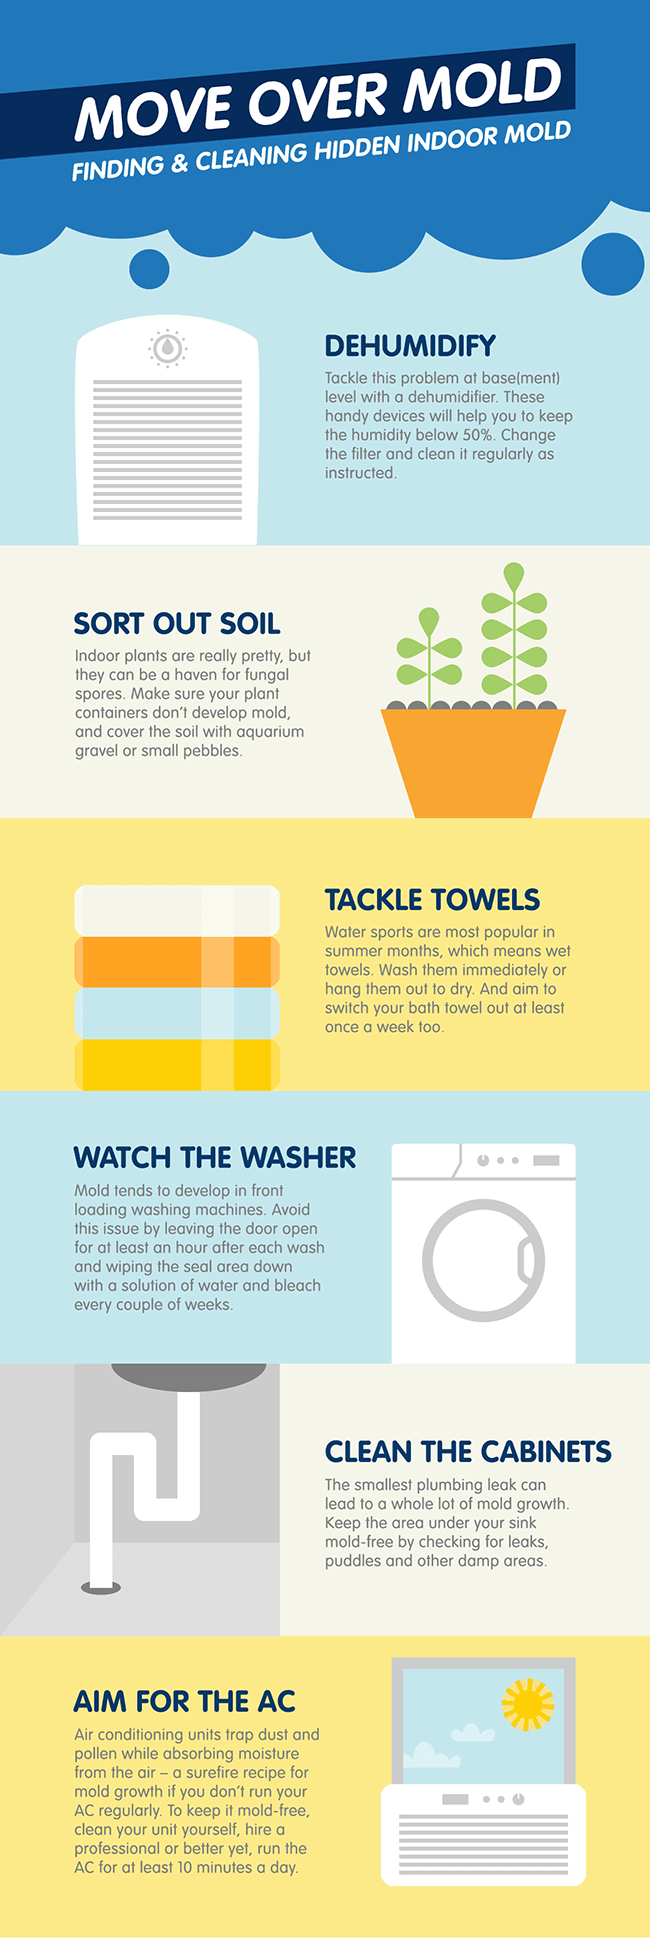 Move Over Mold - Infographic